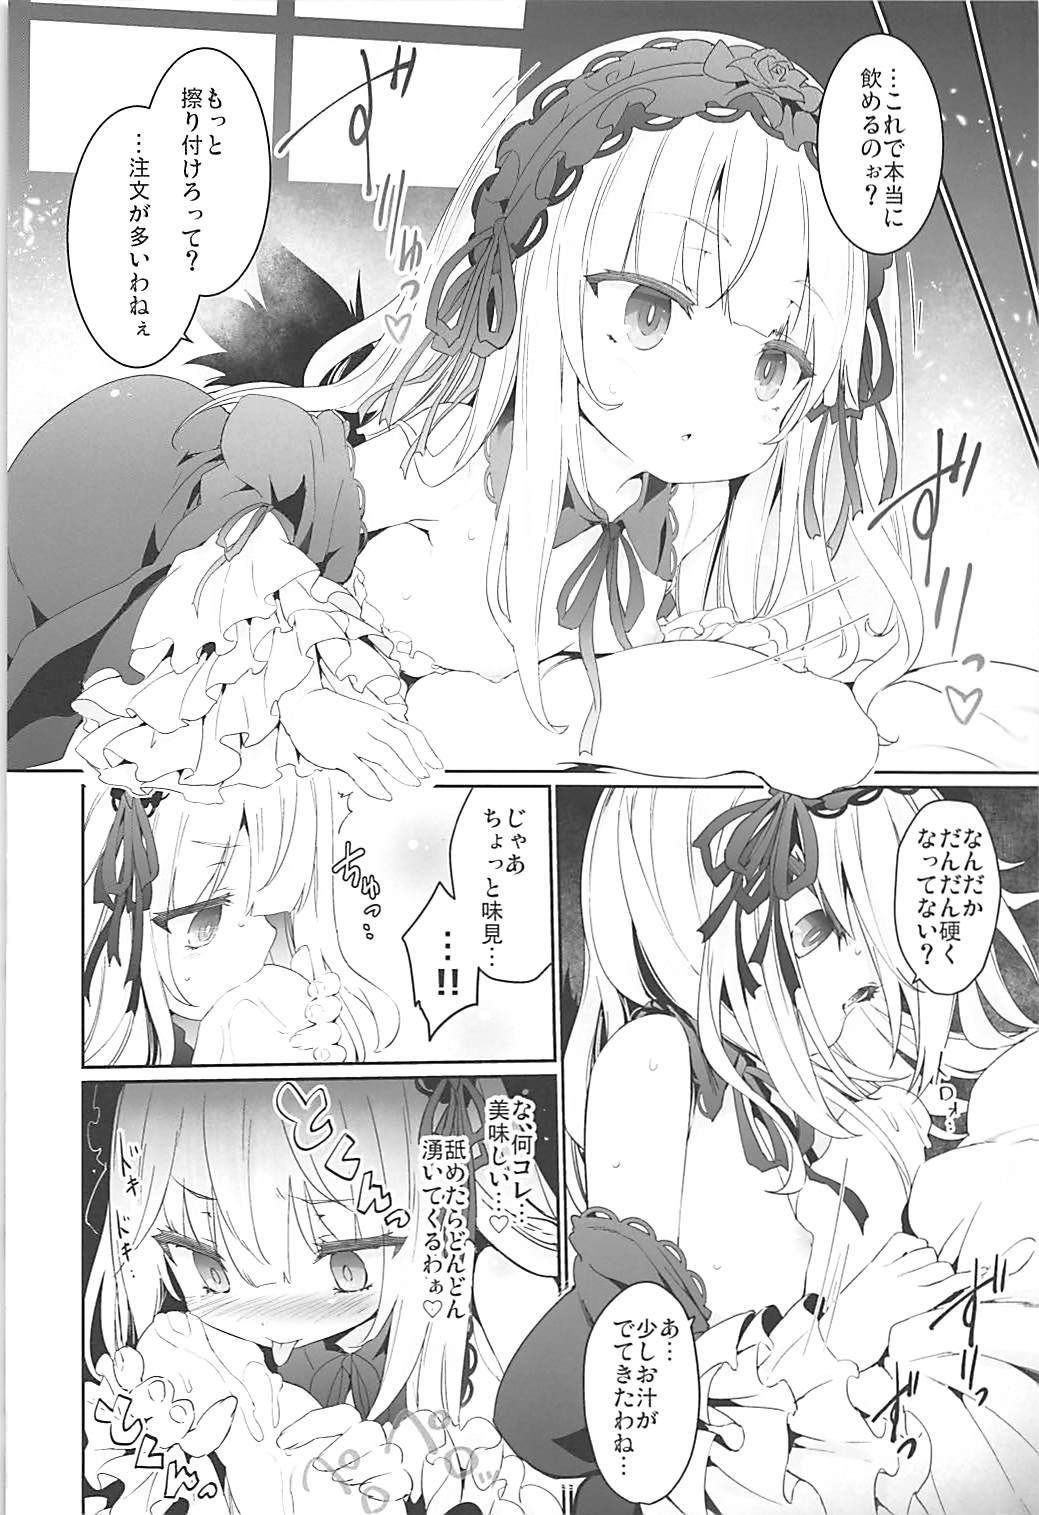 Belly GINTITI 0 - Rozen maiden Tongue - Page 5